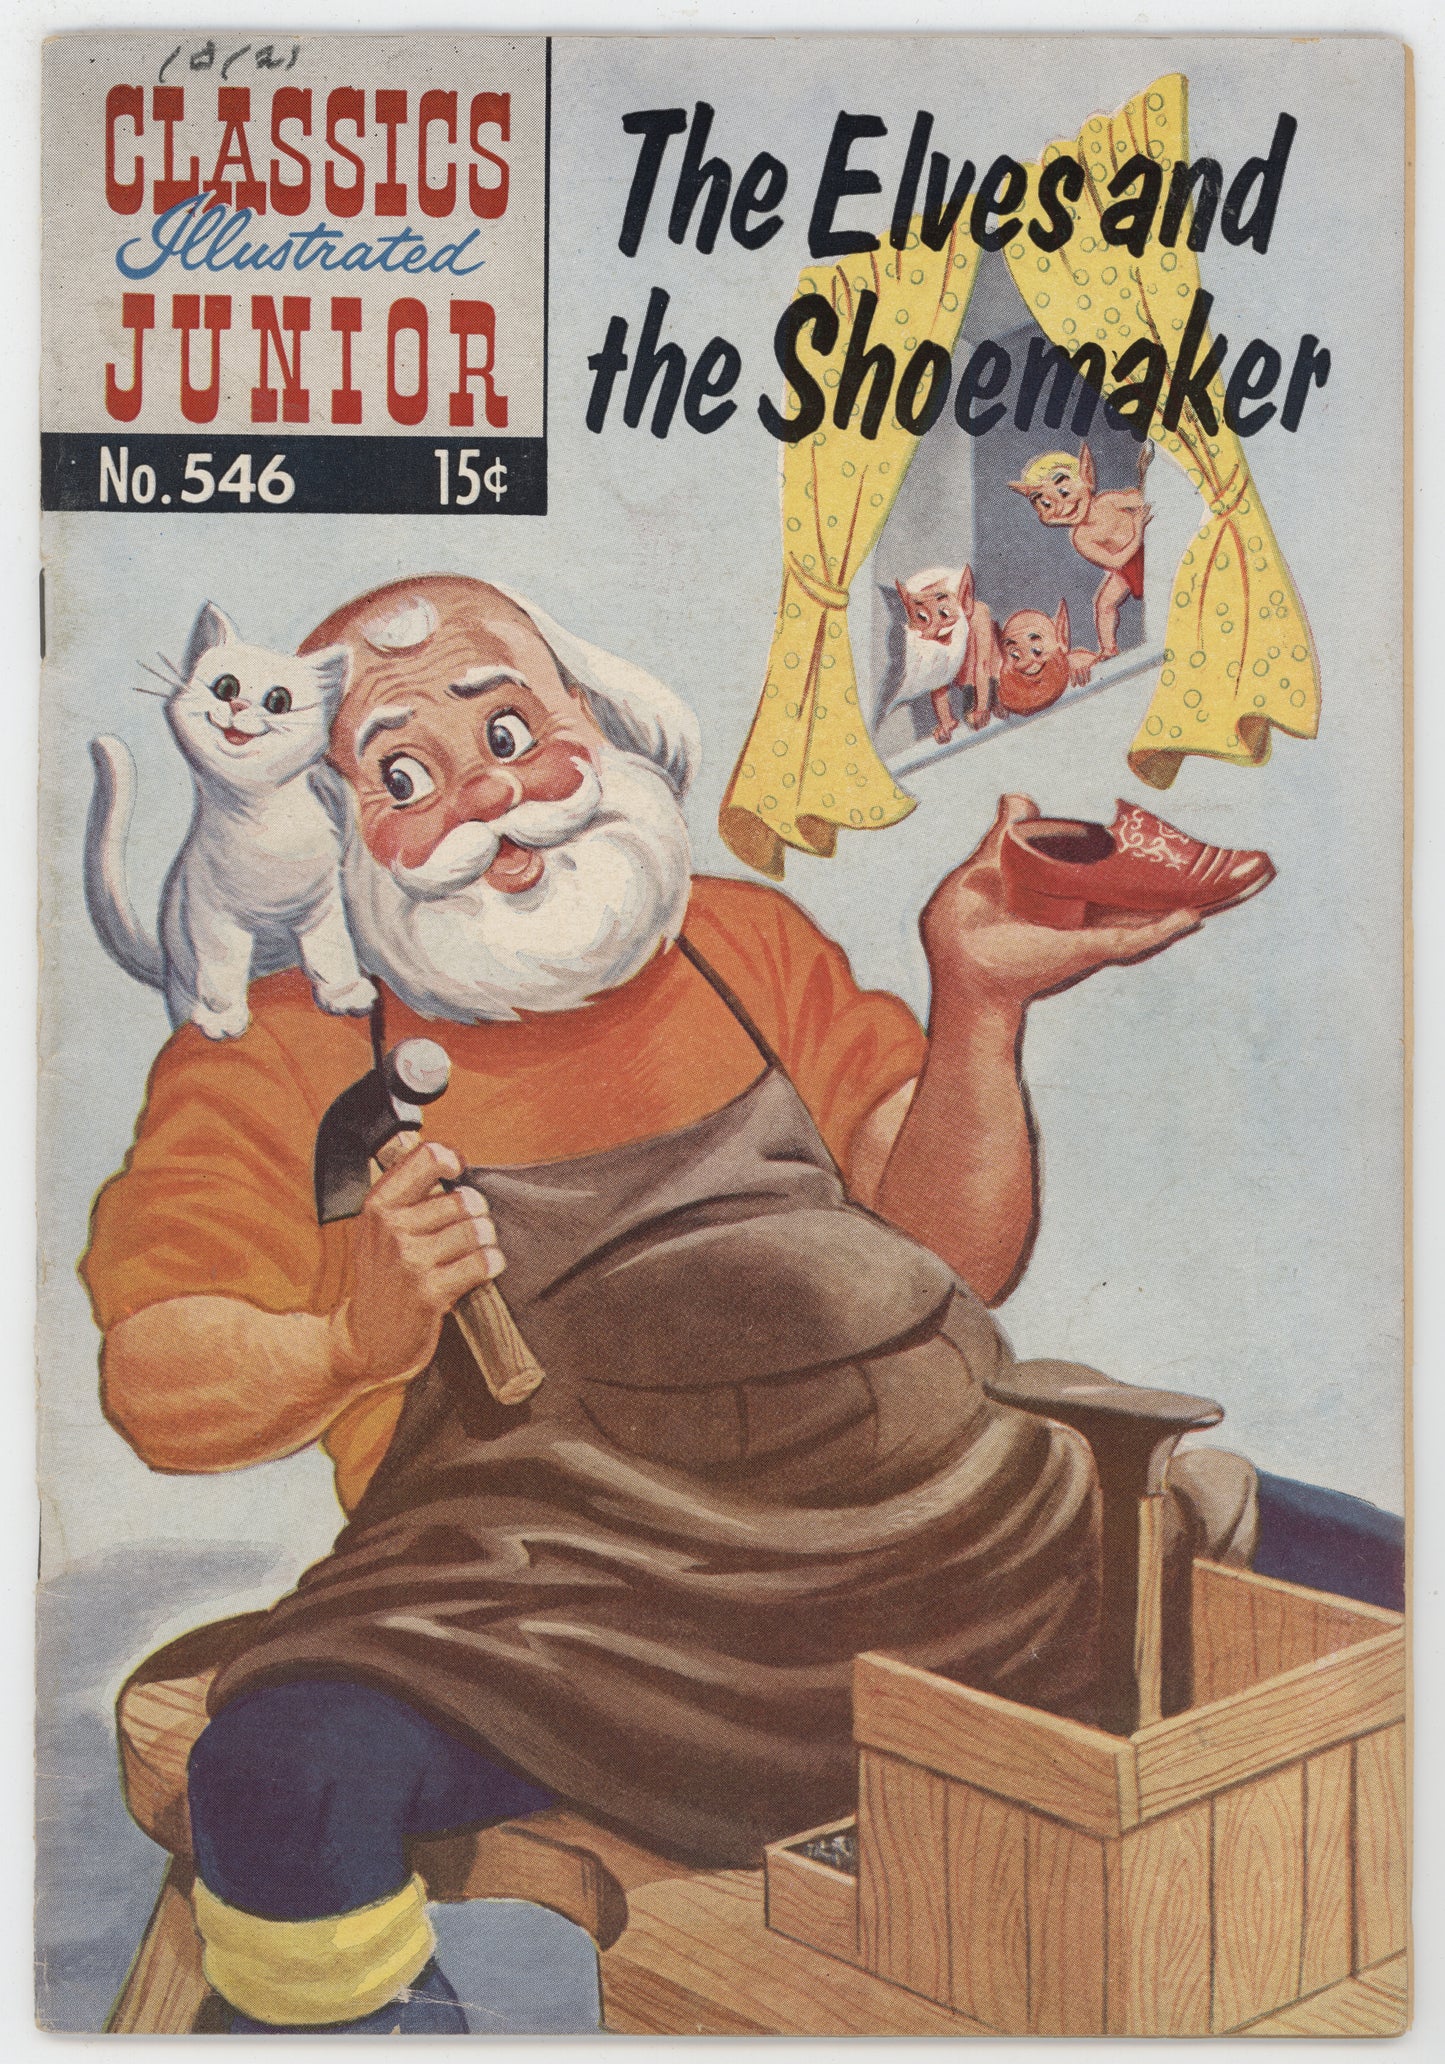 Classics Illustrated Junior 546 Gilberton 1958 FR Elves And The Shoemaker HRN 545